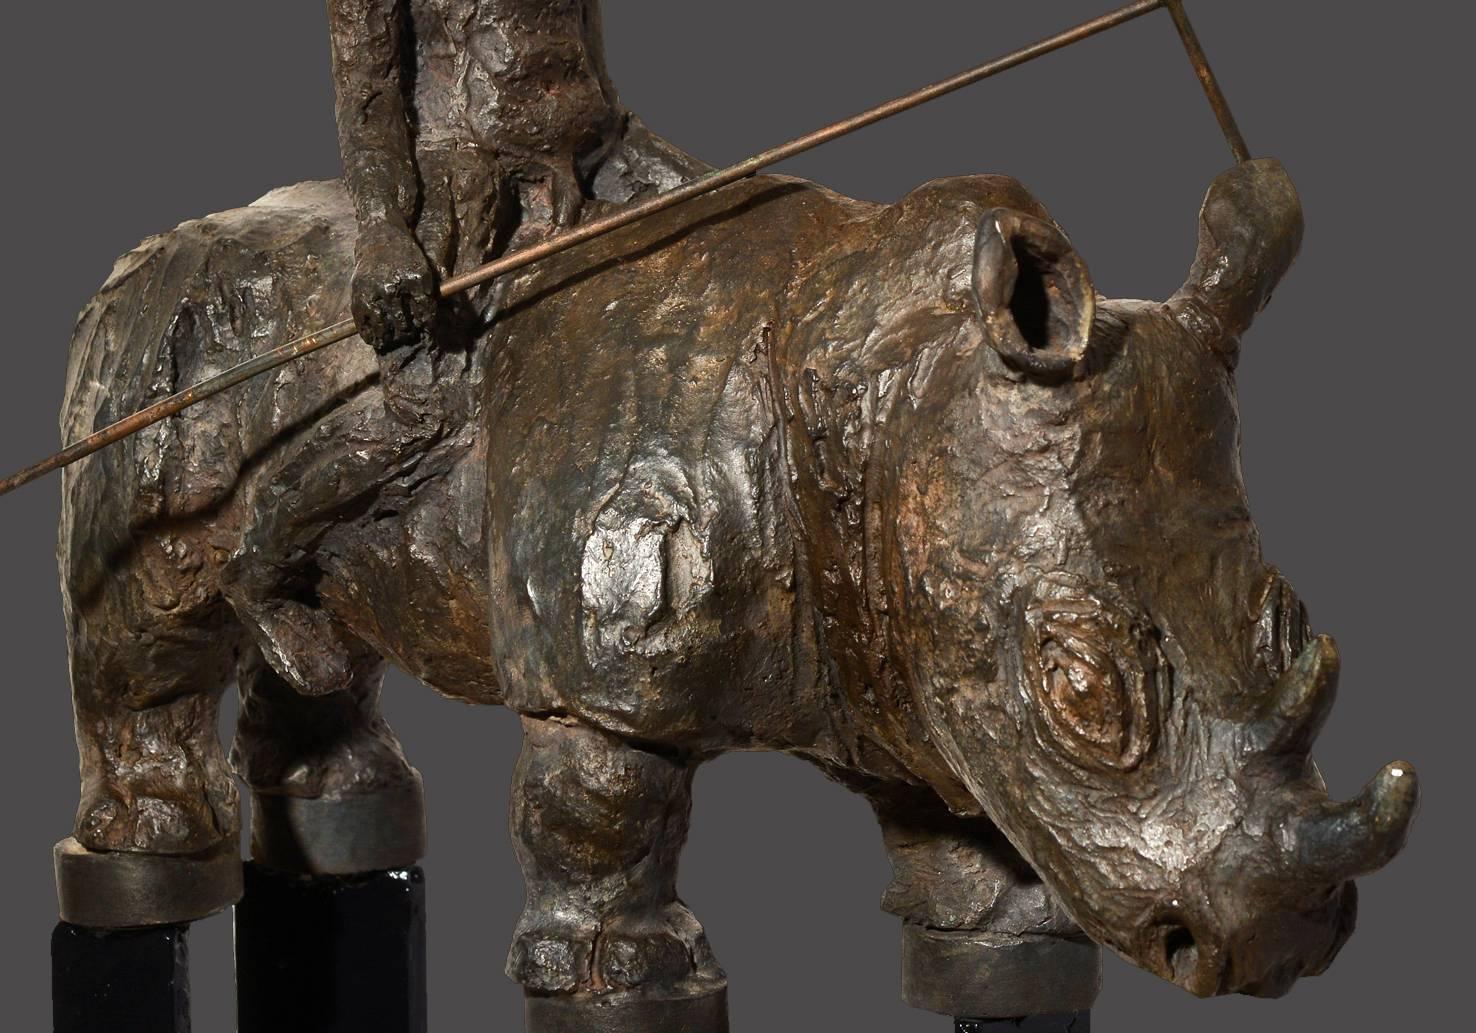 The ultimate ride of the Christians Samurais riding their rhinoceroses.
Historical work by the sculptor Mariko about the troubled period of the 17th. Century where the Christians were persecuted in Japan.
This period of time inspired the director of